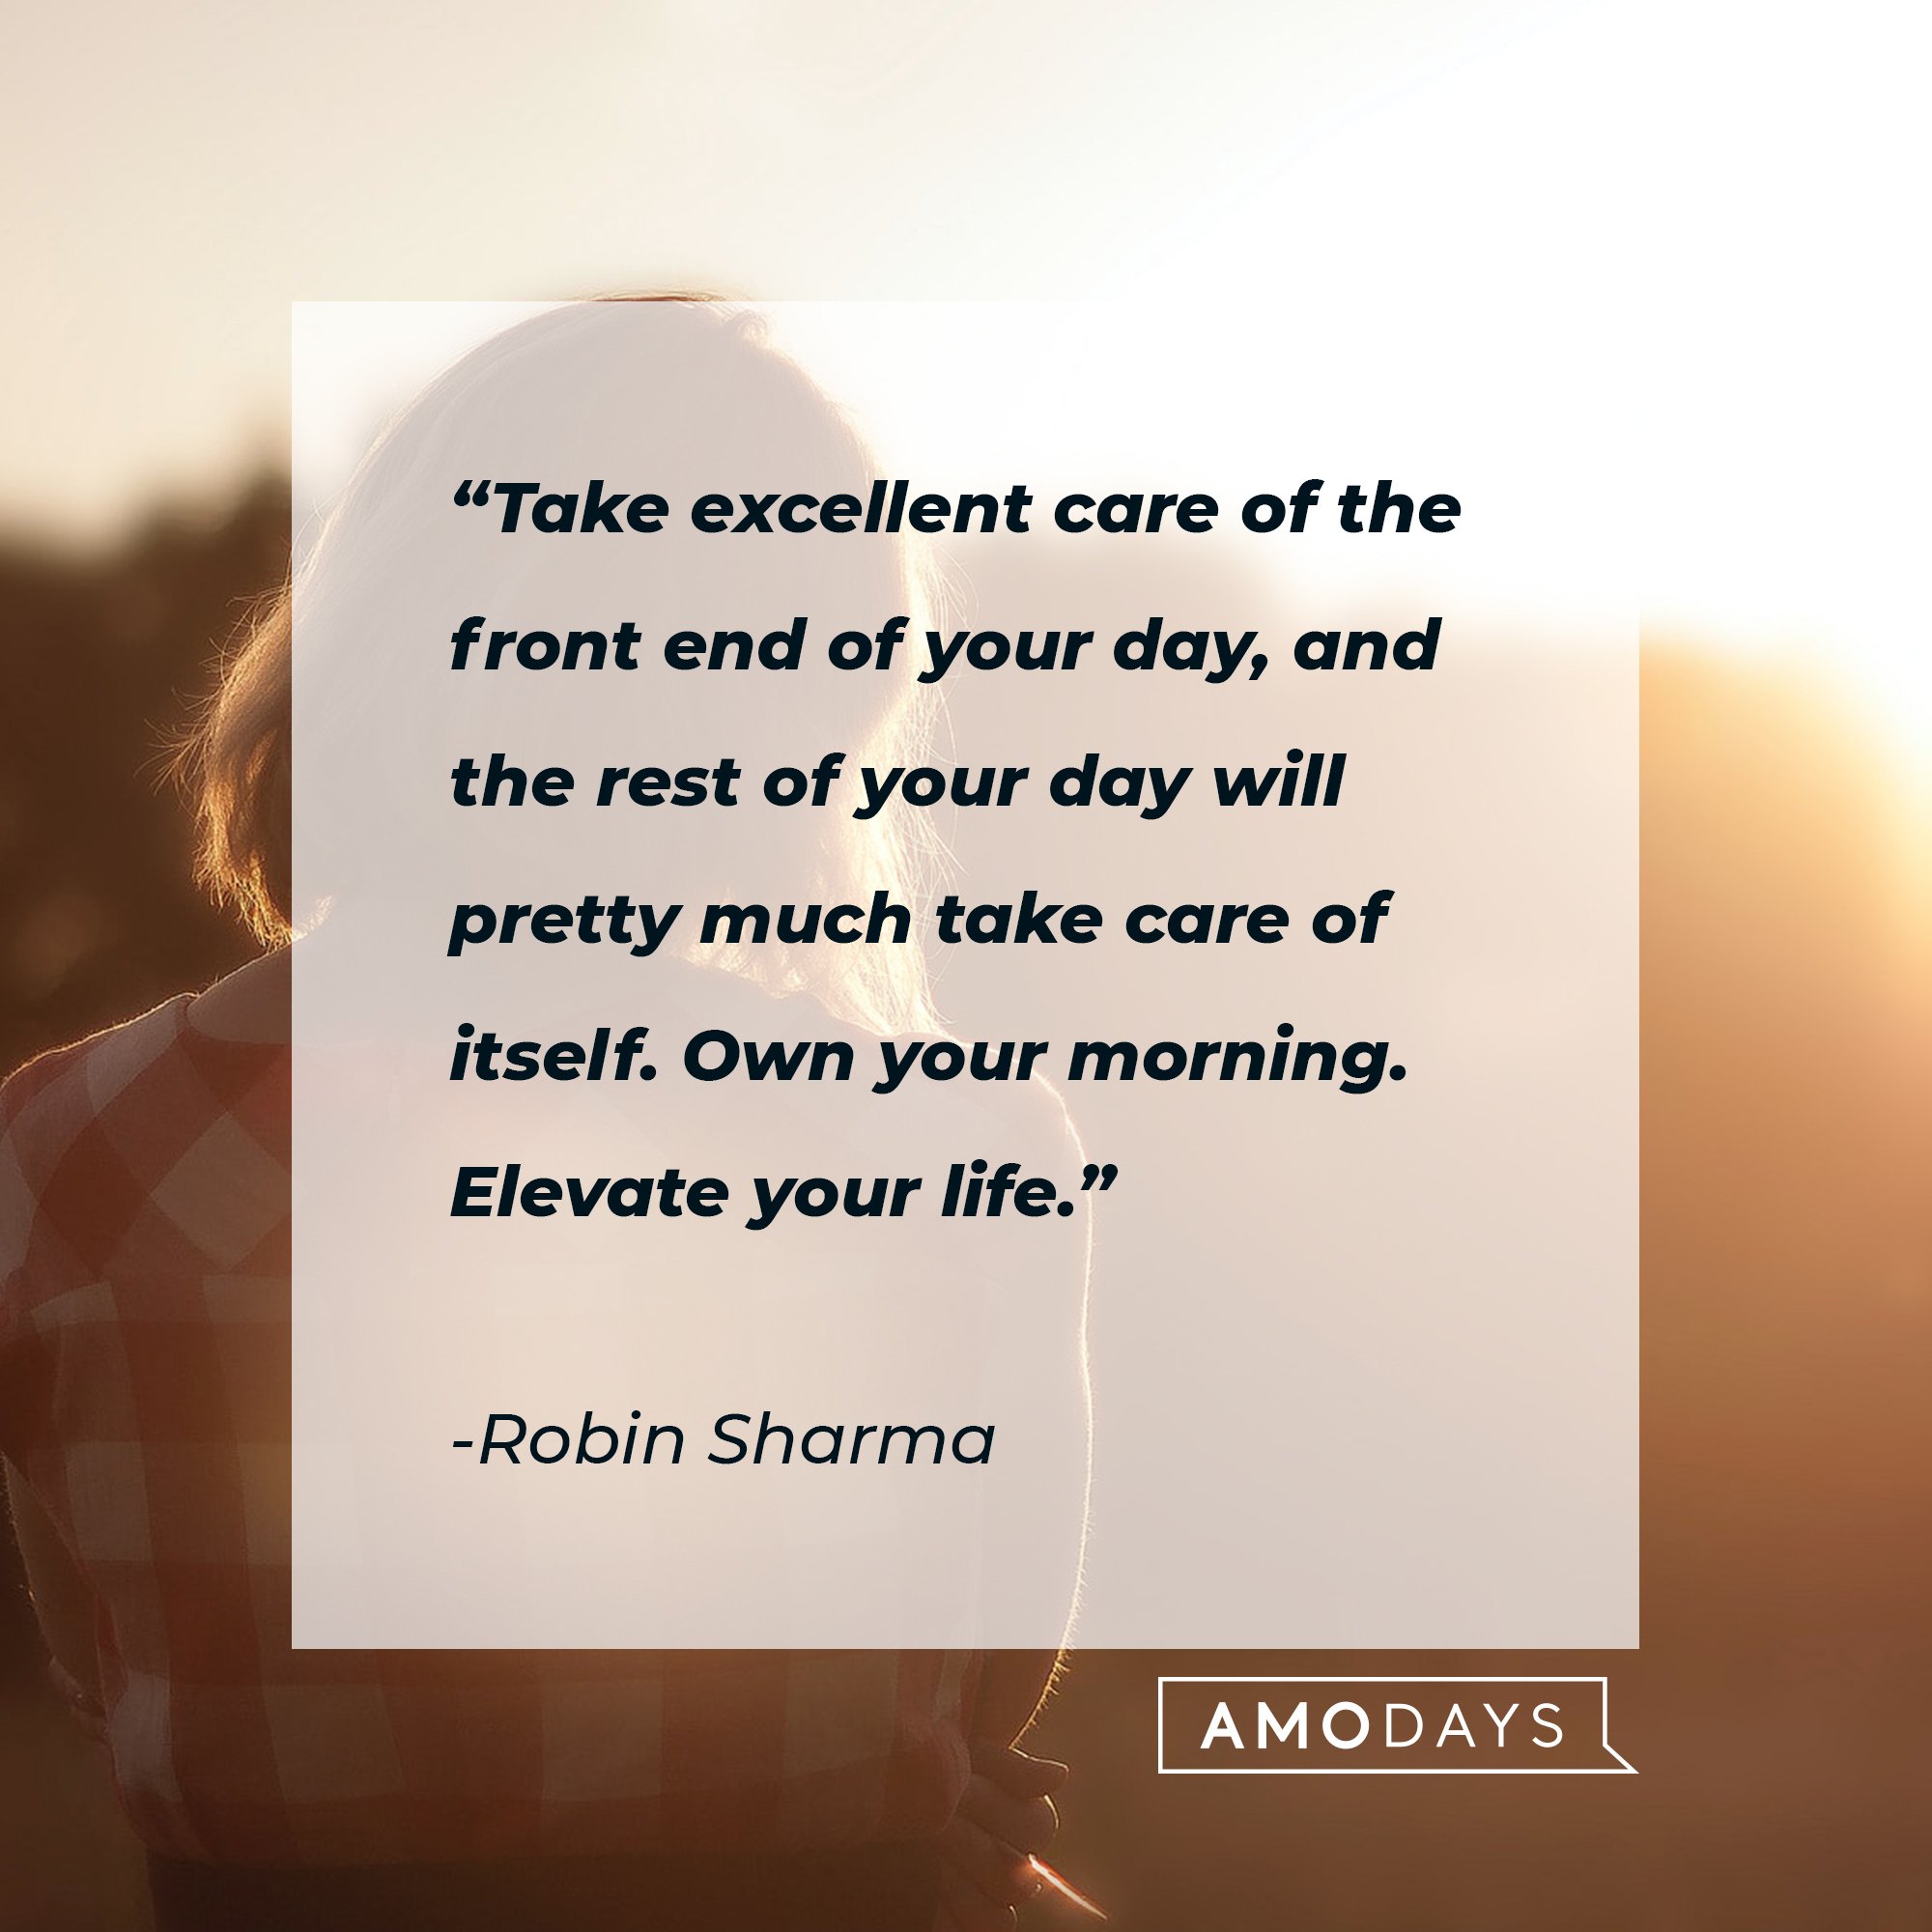 Robin Sharma’s quote: "Take excellent care of the front end of your day, and the rest of your day will pretty much take care of itself. Own your morning. Elevate your life."  | Image: AmoDays 